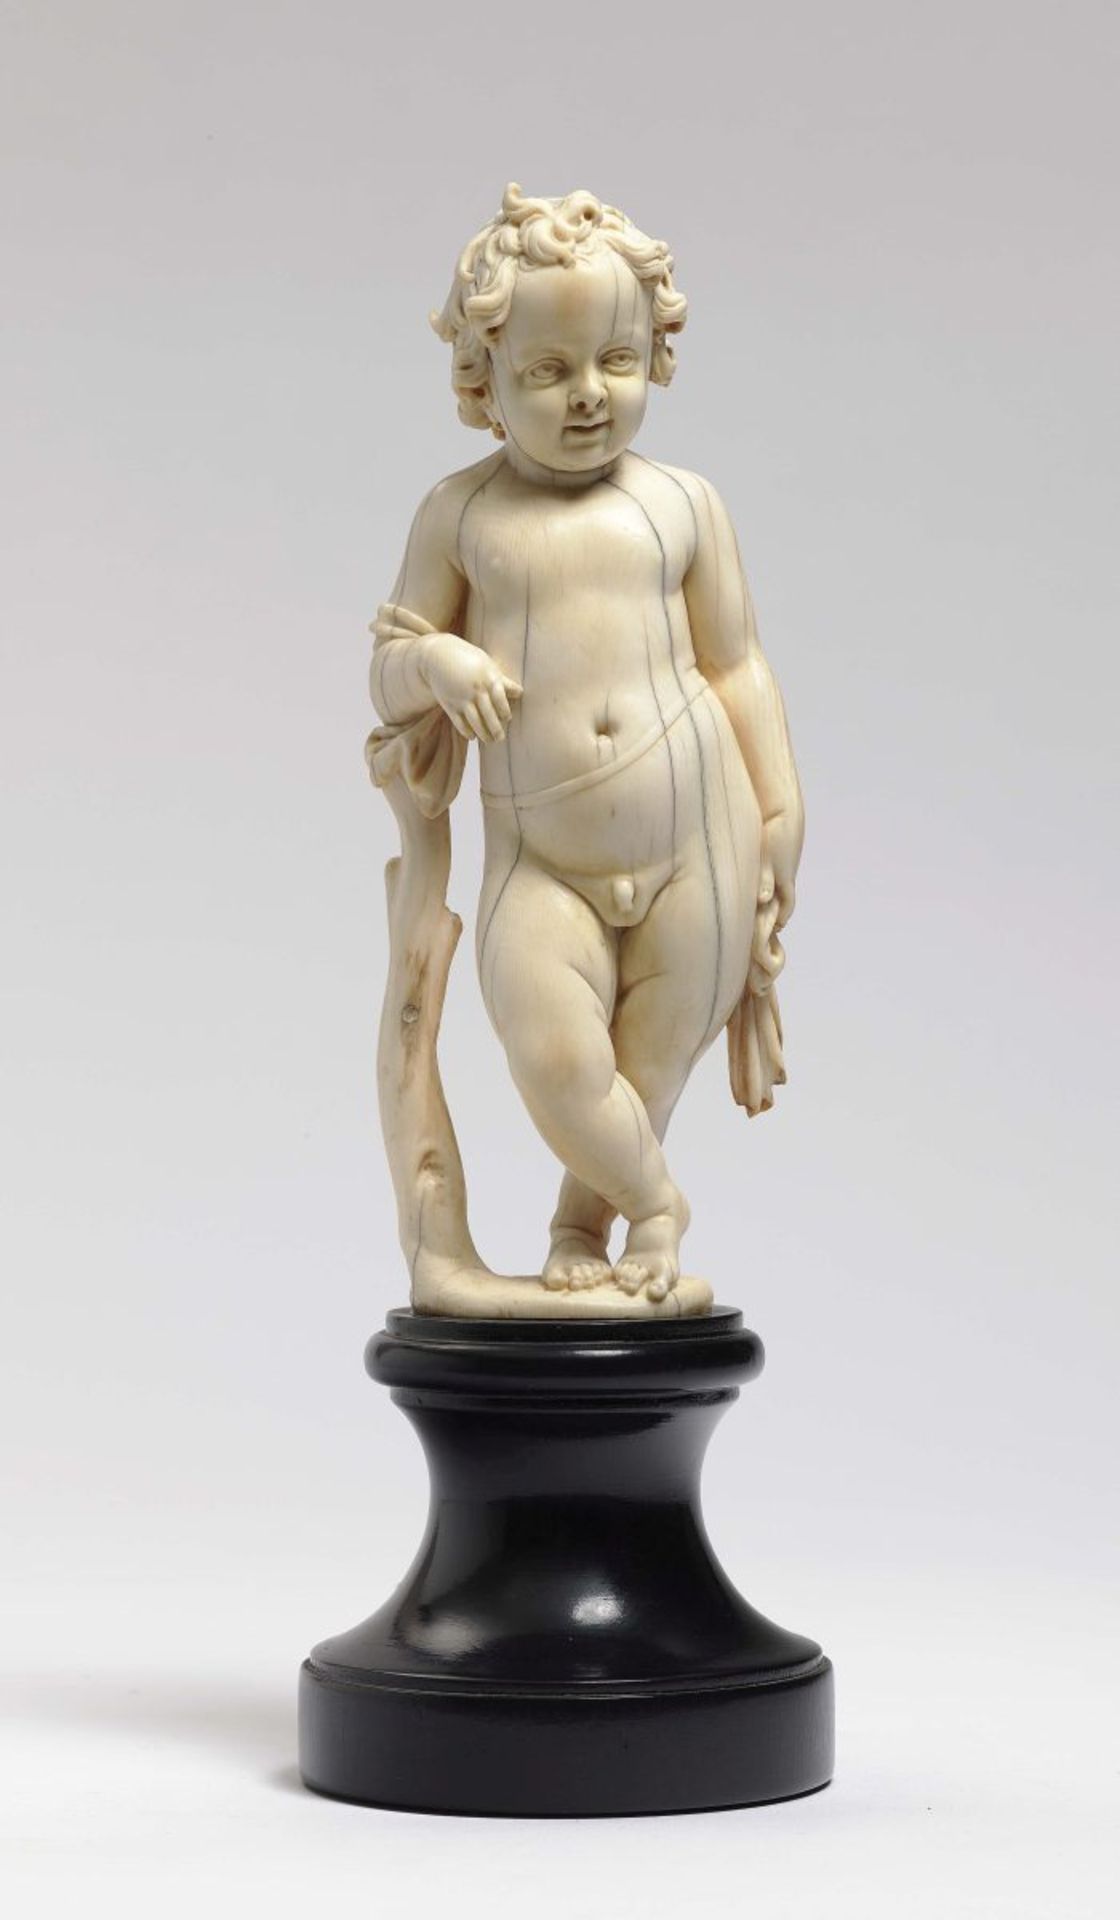 CupidFlemish, 16th Century Ivory, carved in full round. Wings missing. Height 17 cm.Angel,